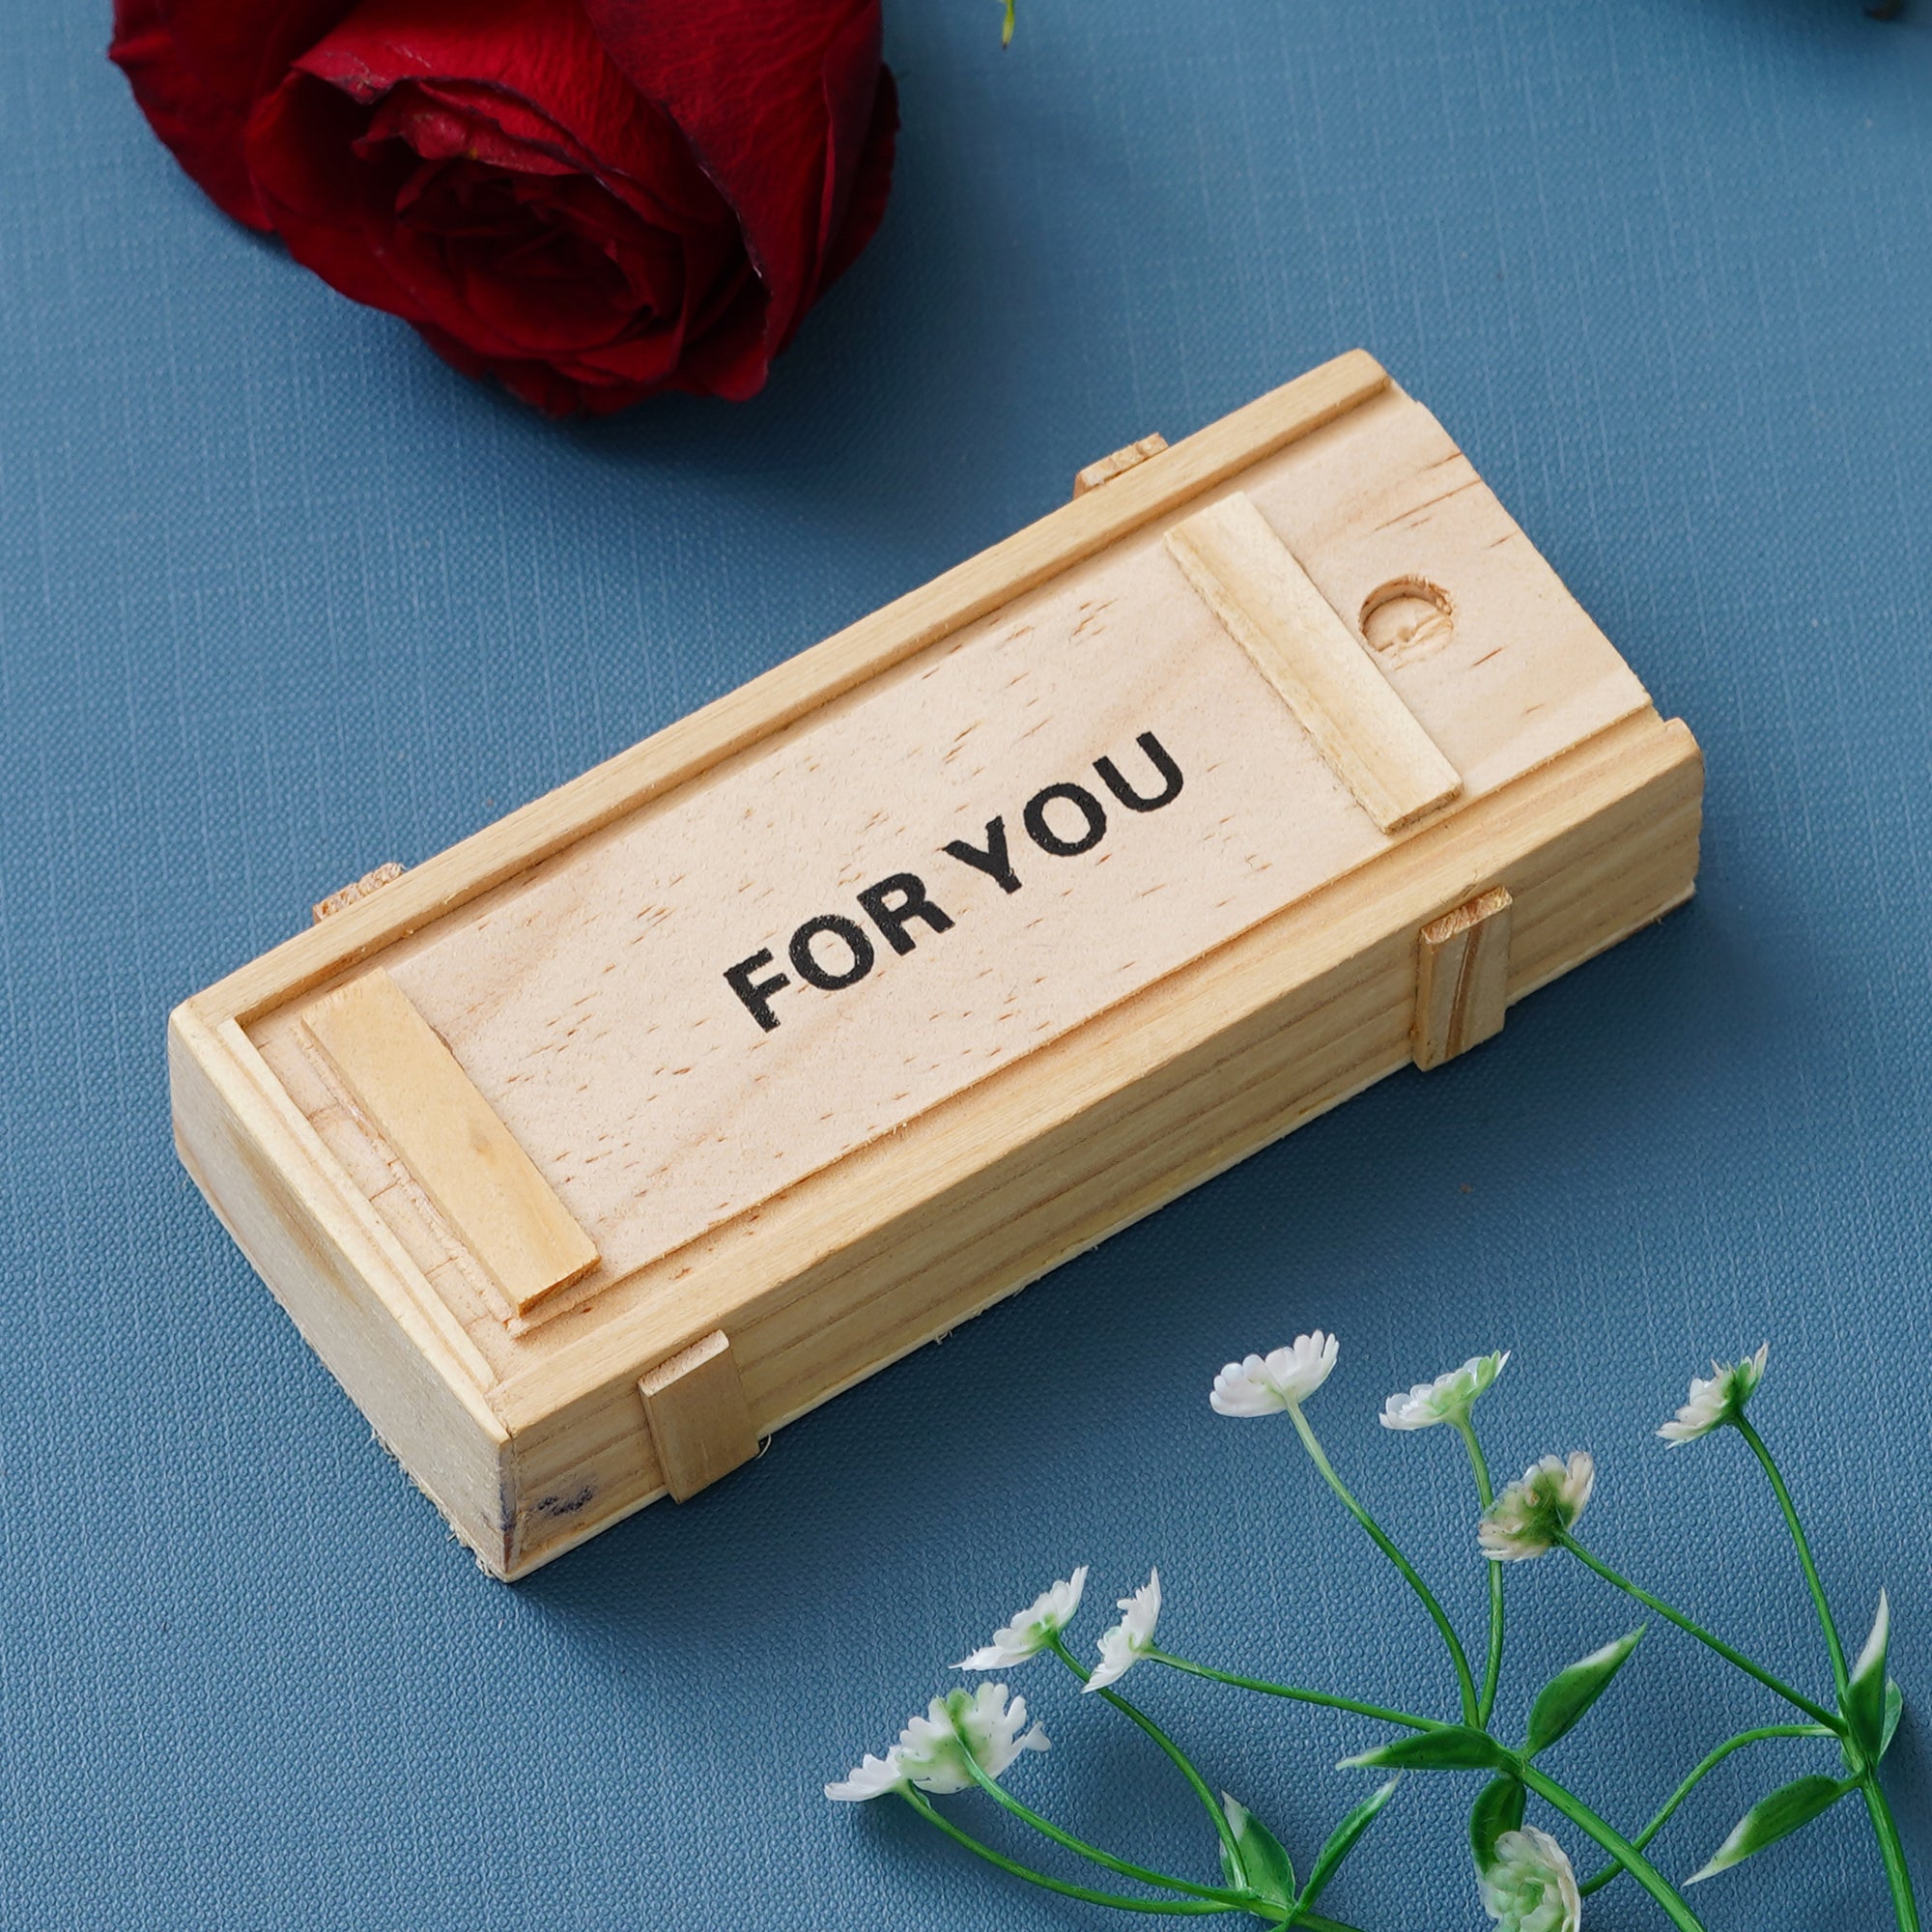 Set Of 7 Personal Messages Greeting Bottles In Wooden Box "For You" 2